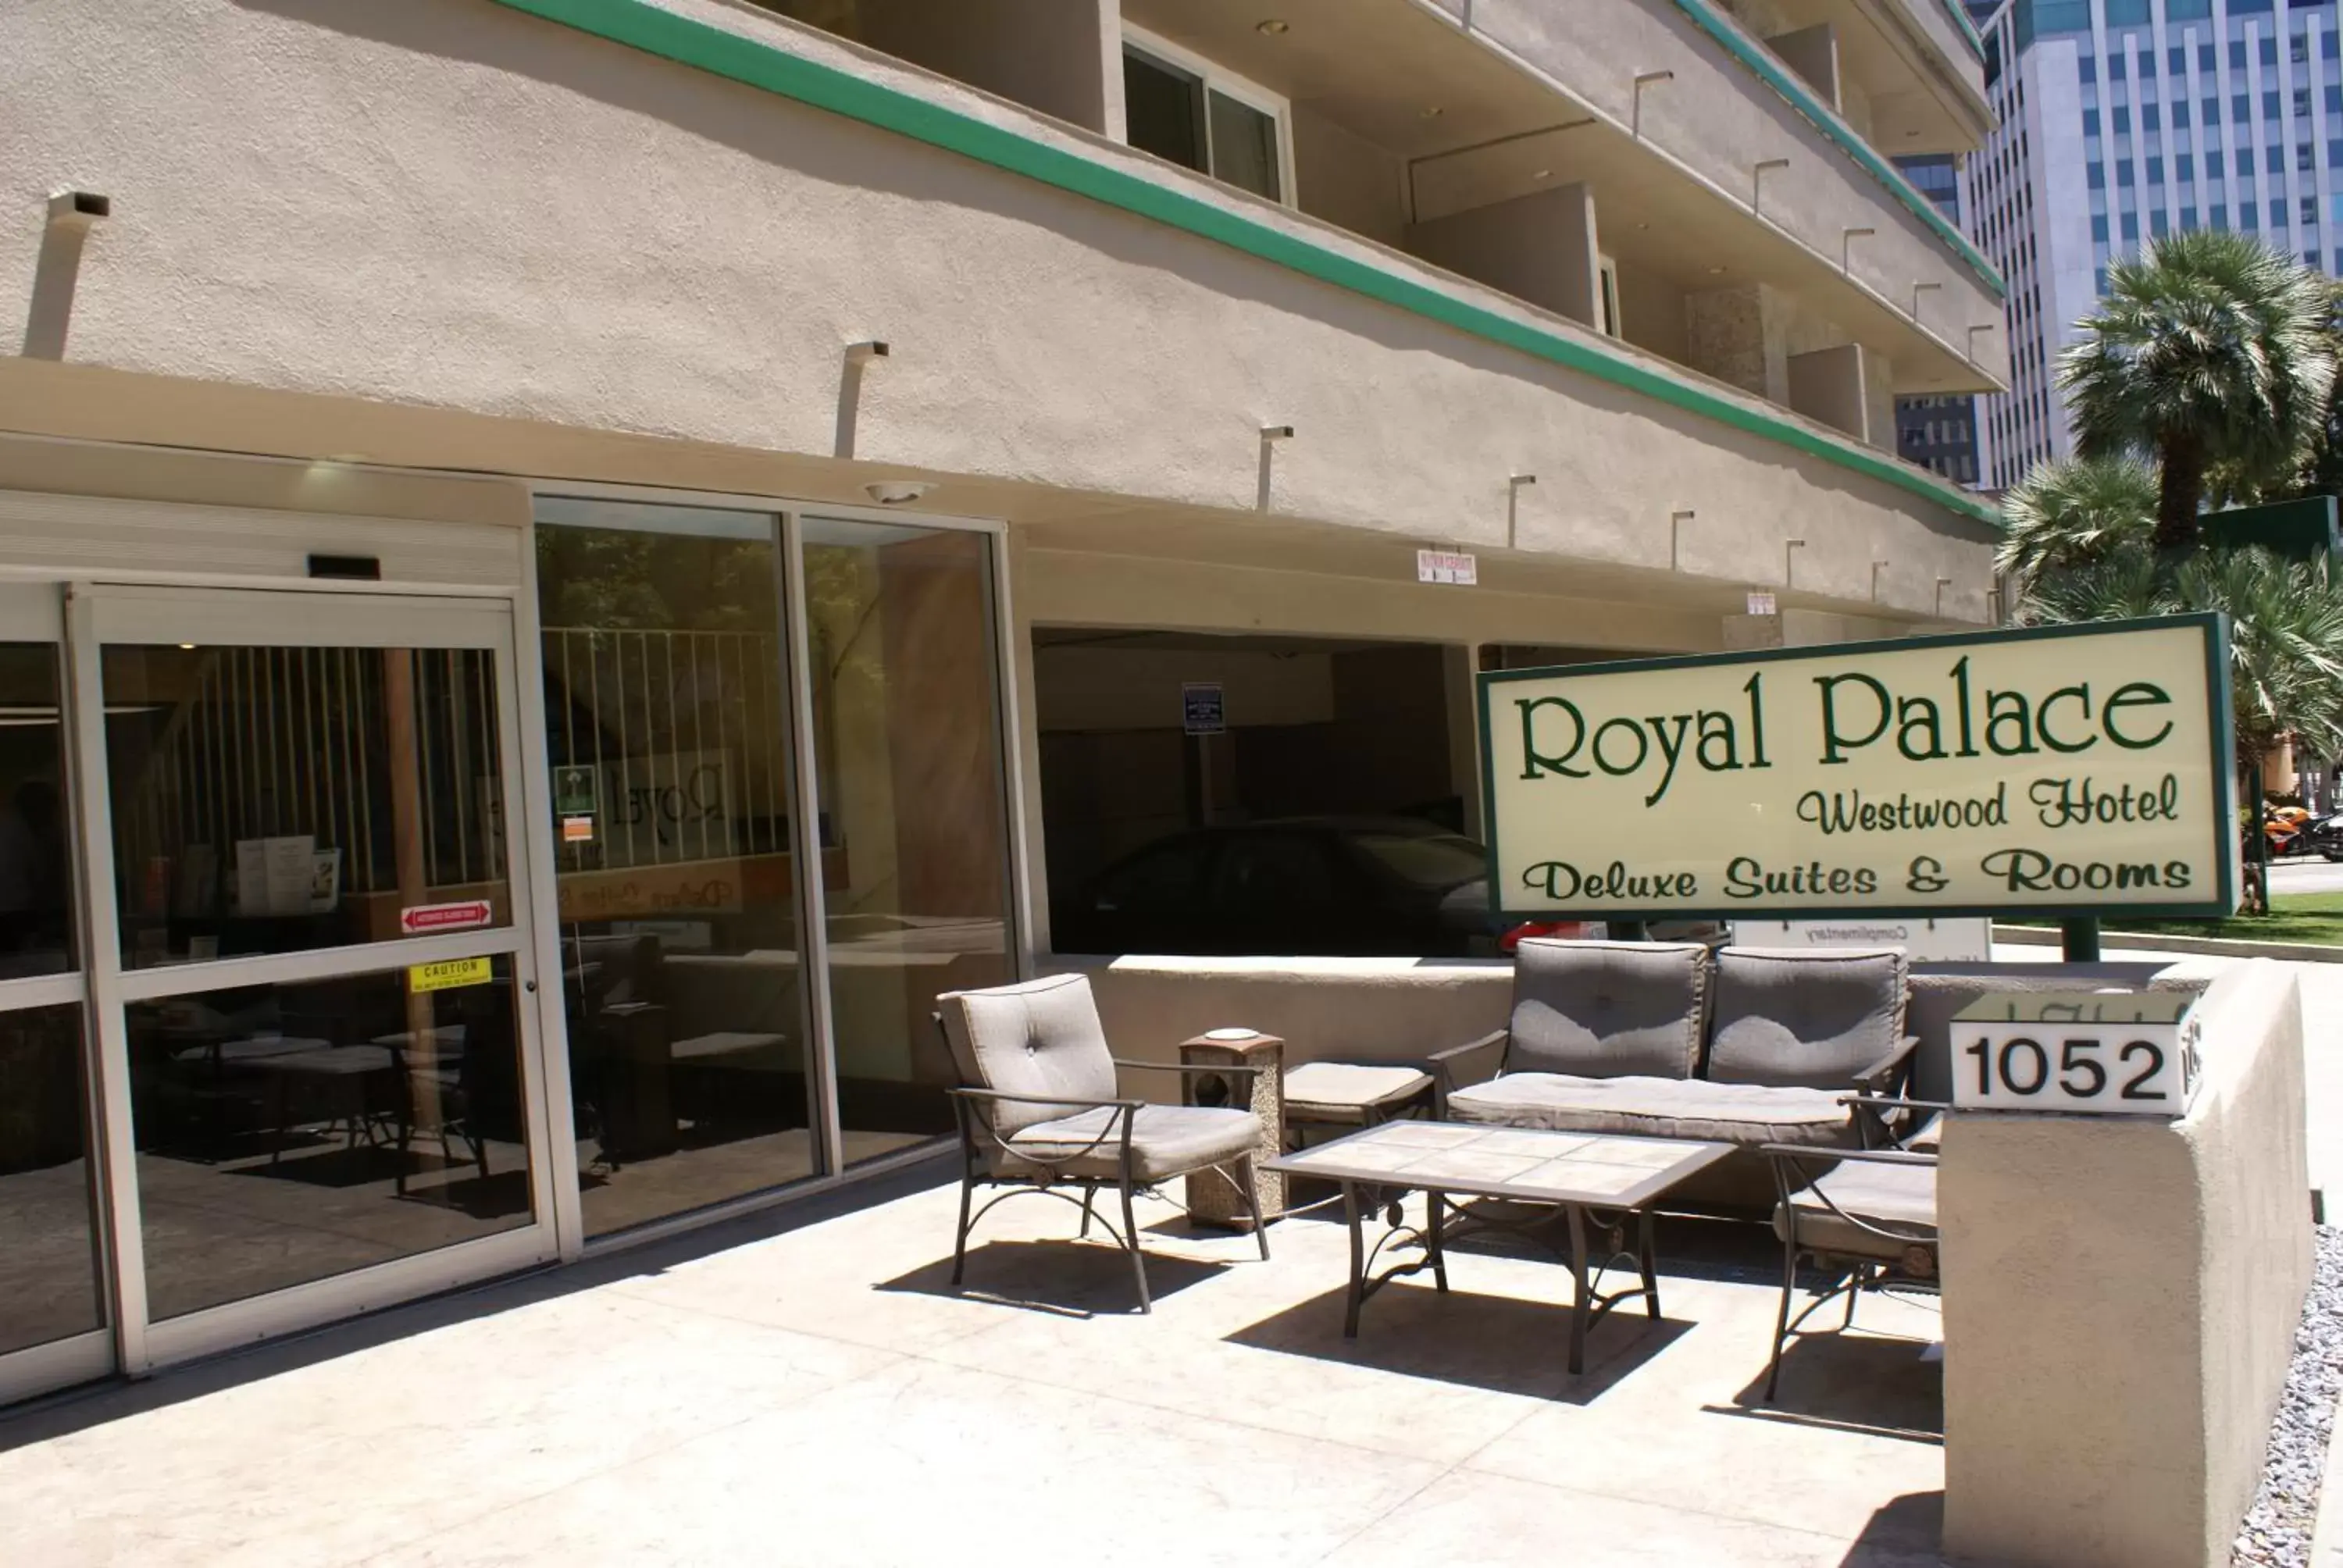 Facade/entrance in Royal Palace Westwood Hotel